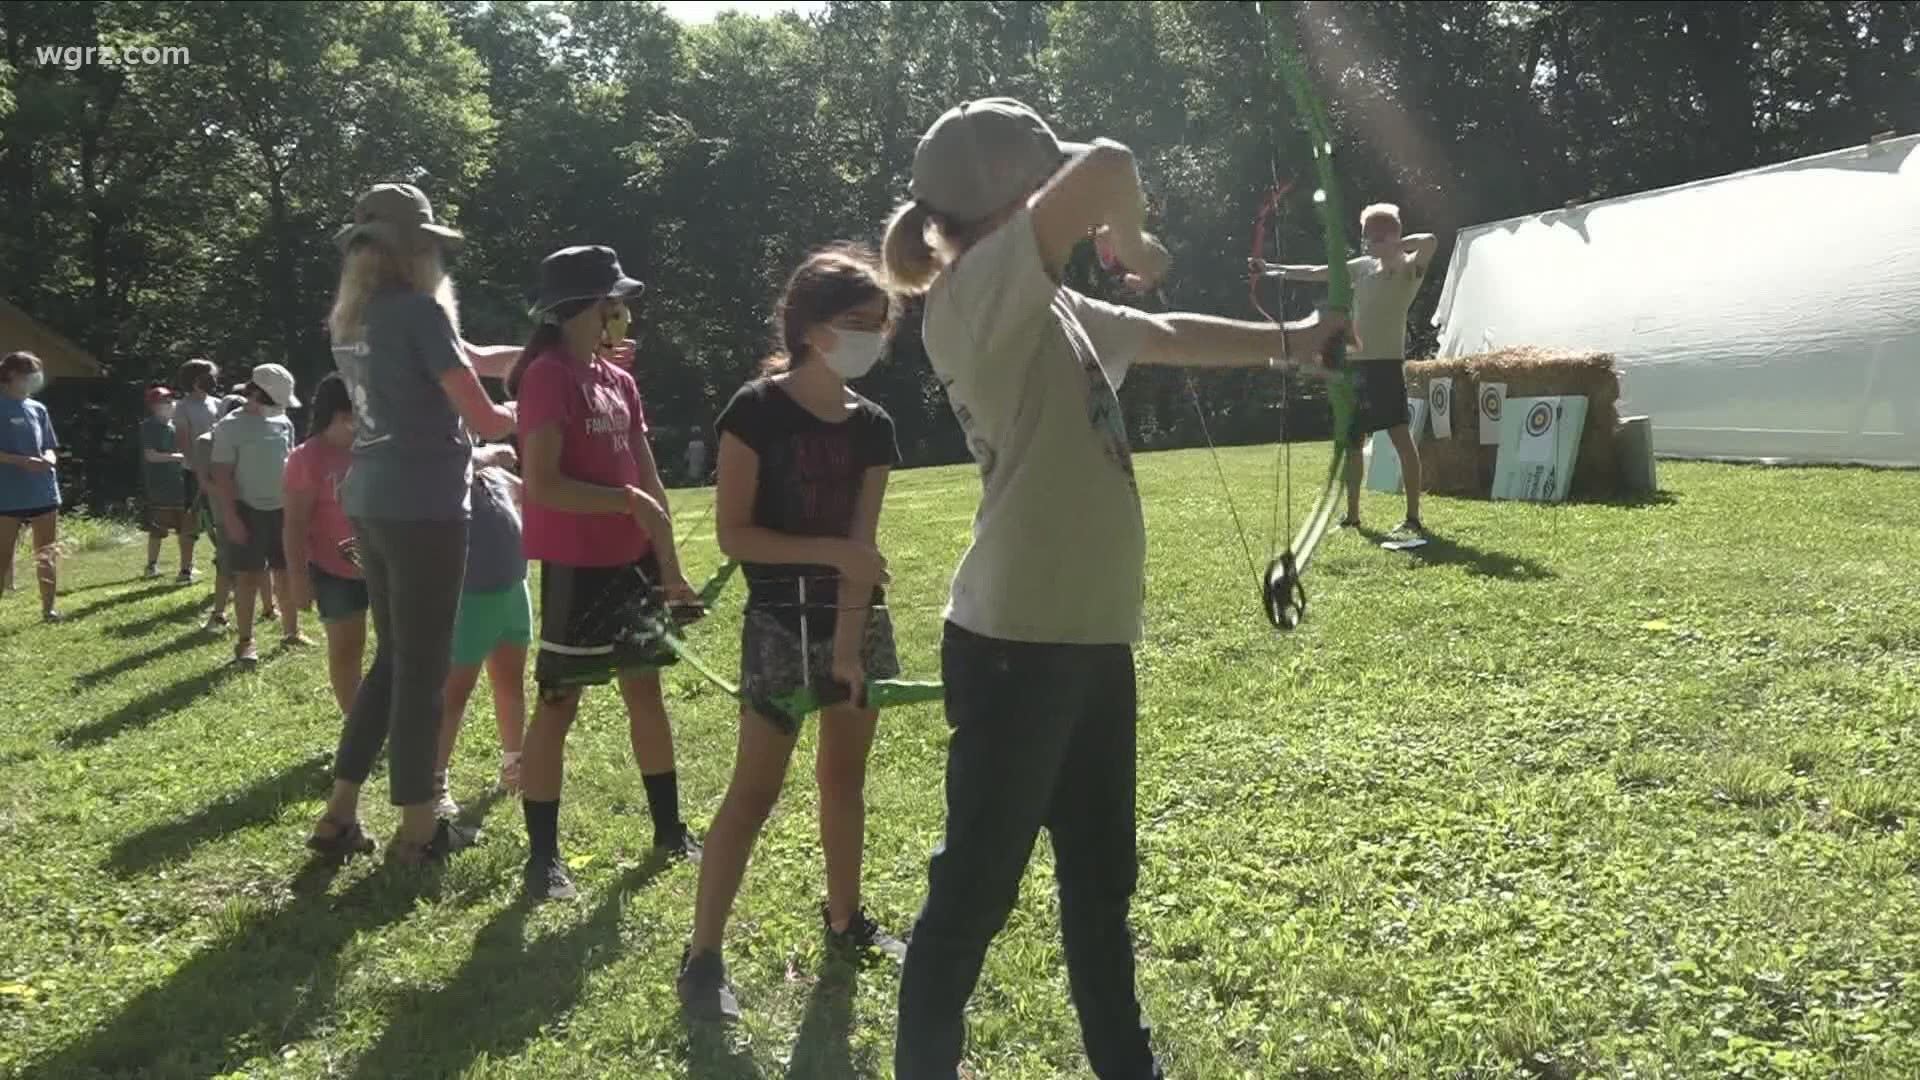 YMCA Buffalo Niagara has reduced the number of summer camp sites from 20 to 11 this year, in response to the COVID-19 pandemic.